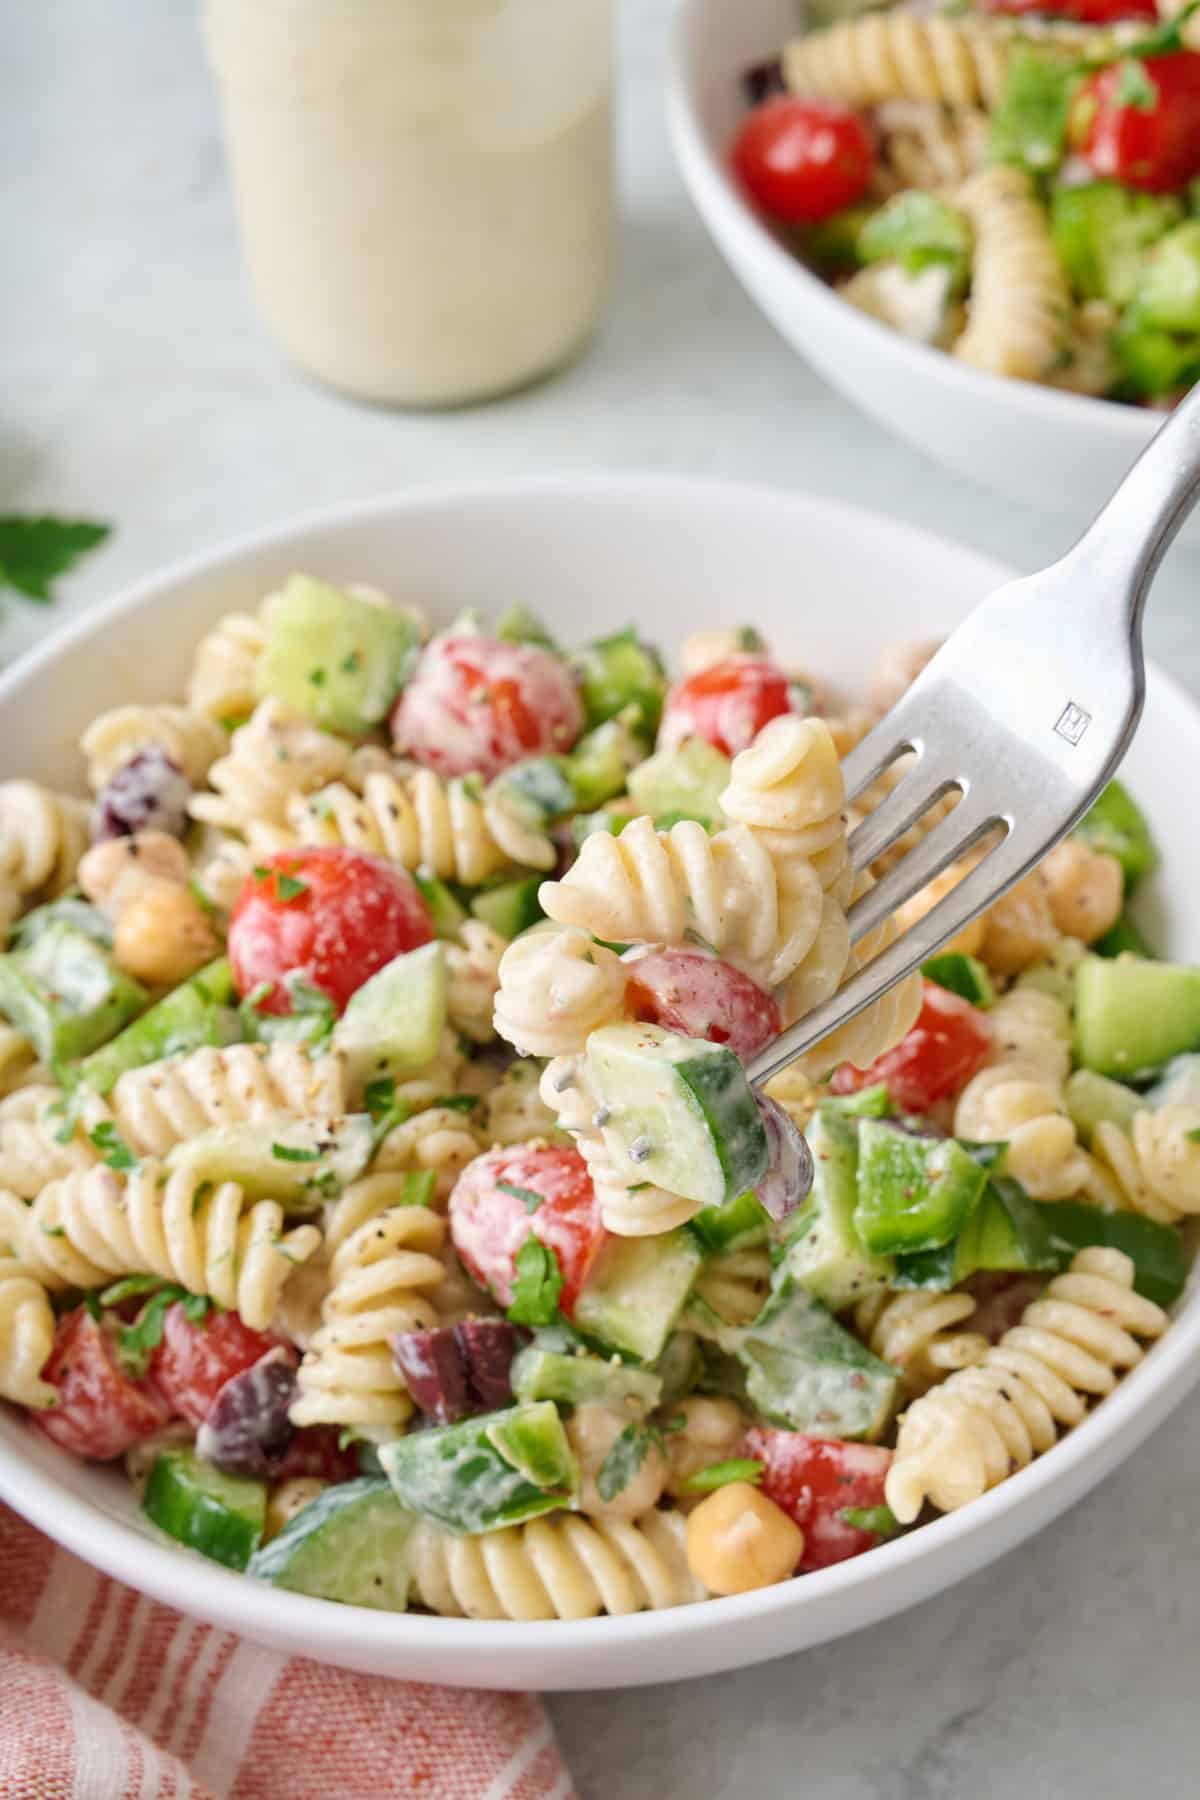 A fork scooping up a bite of tahini pasta salad from a small bowl.